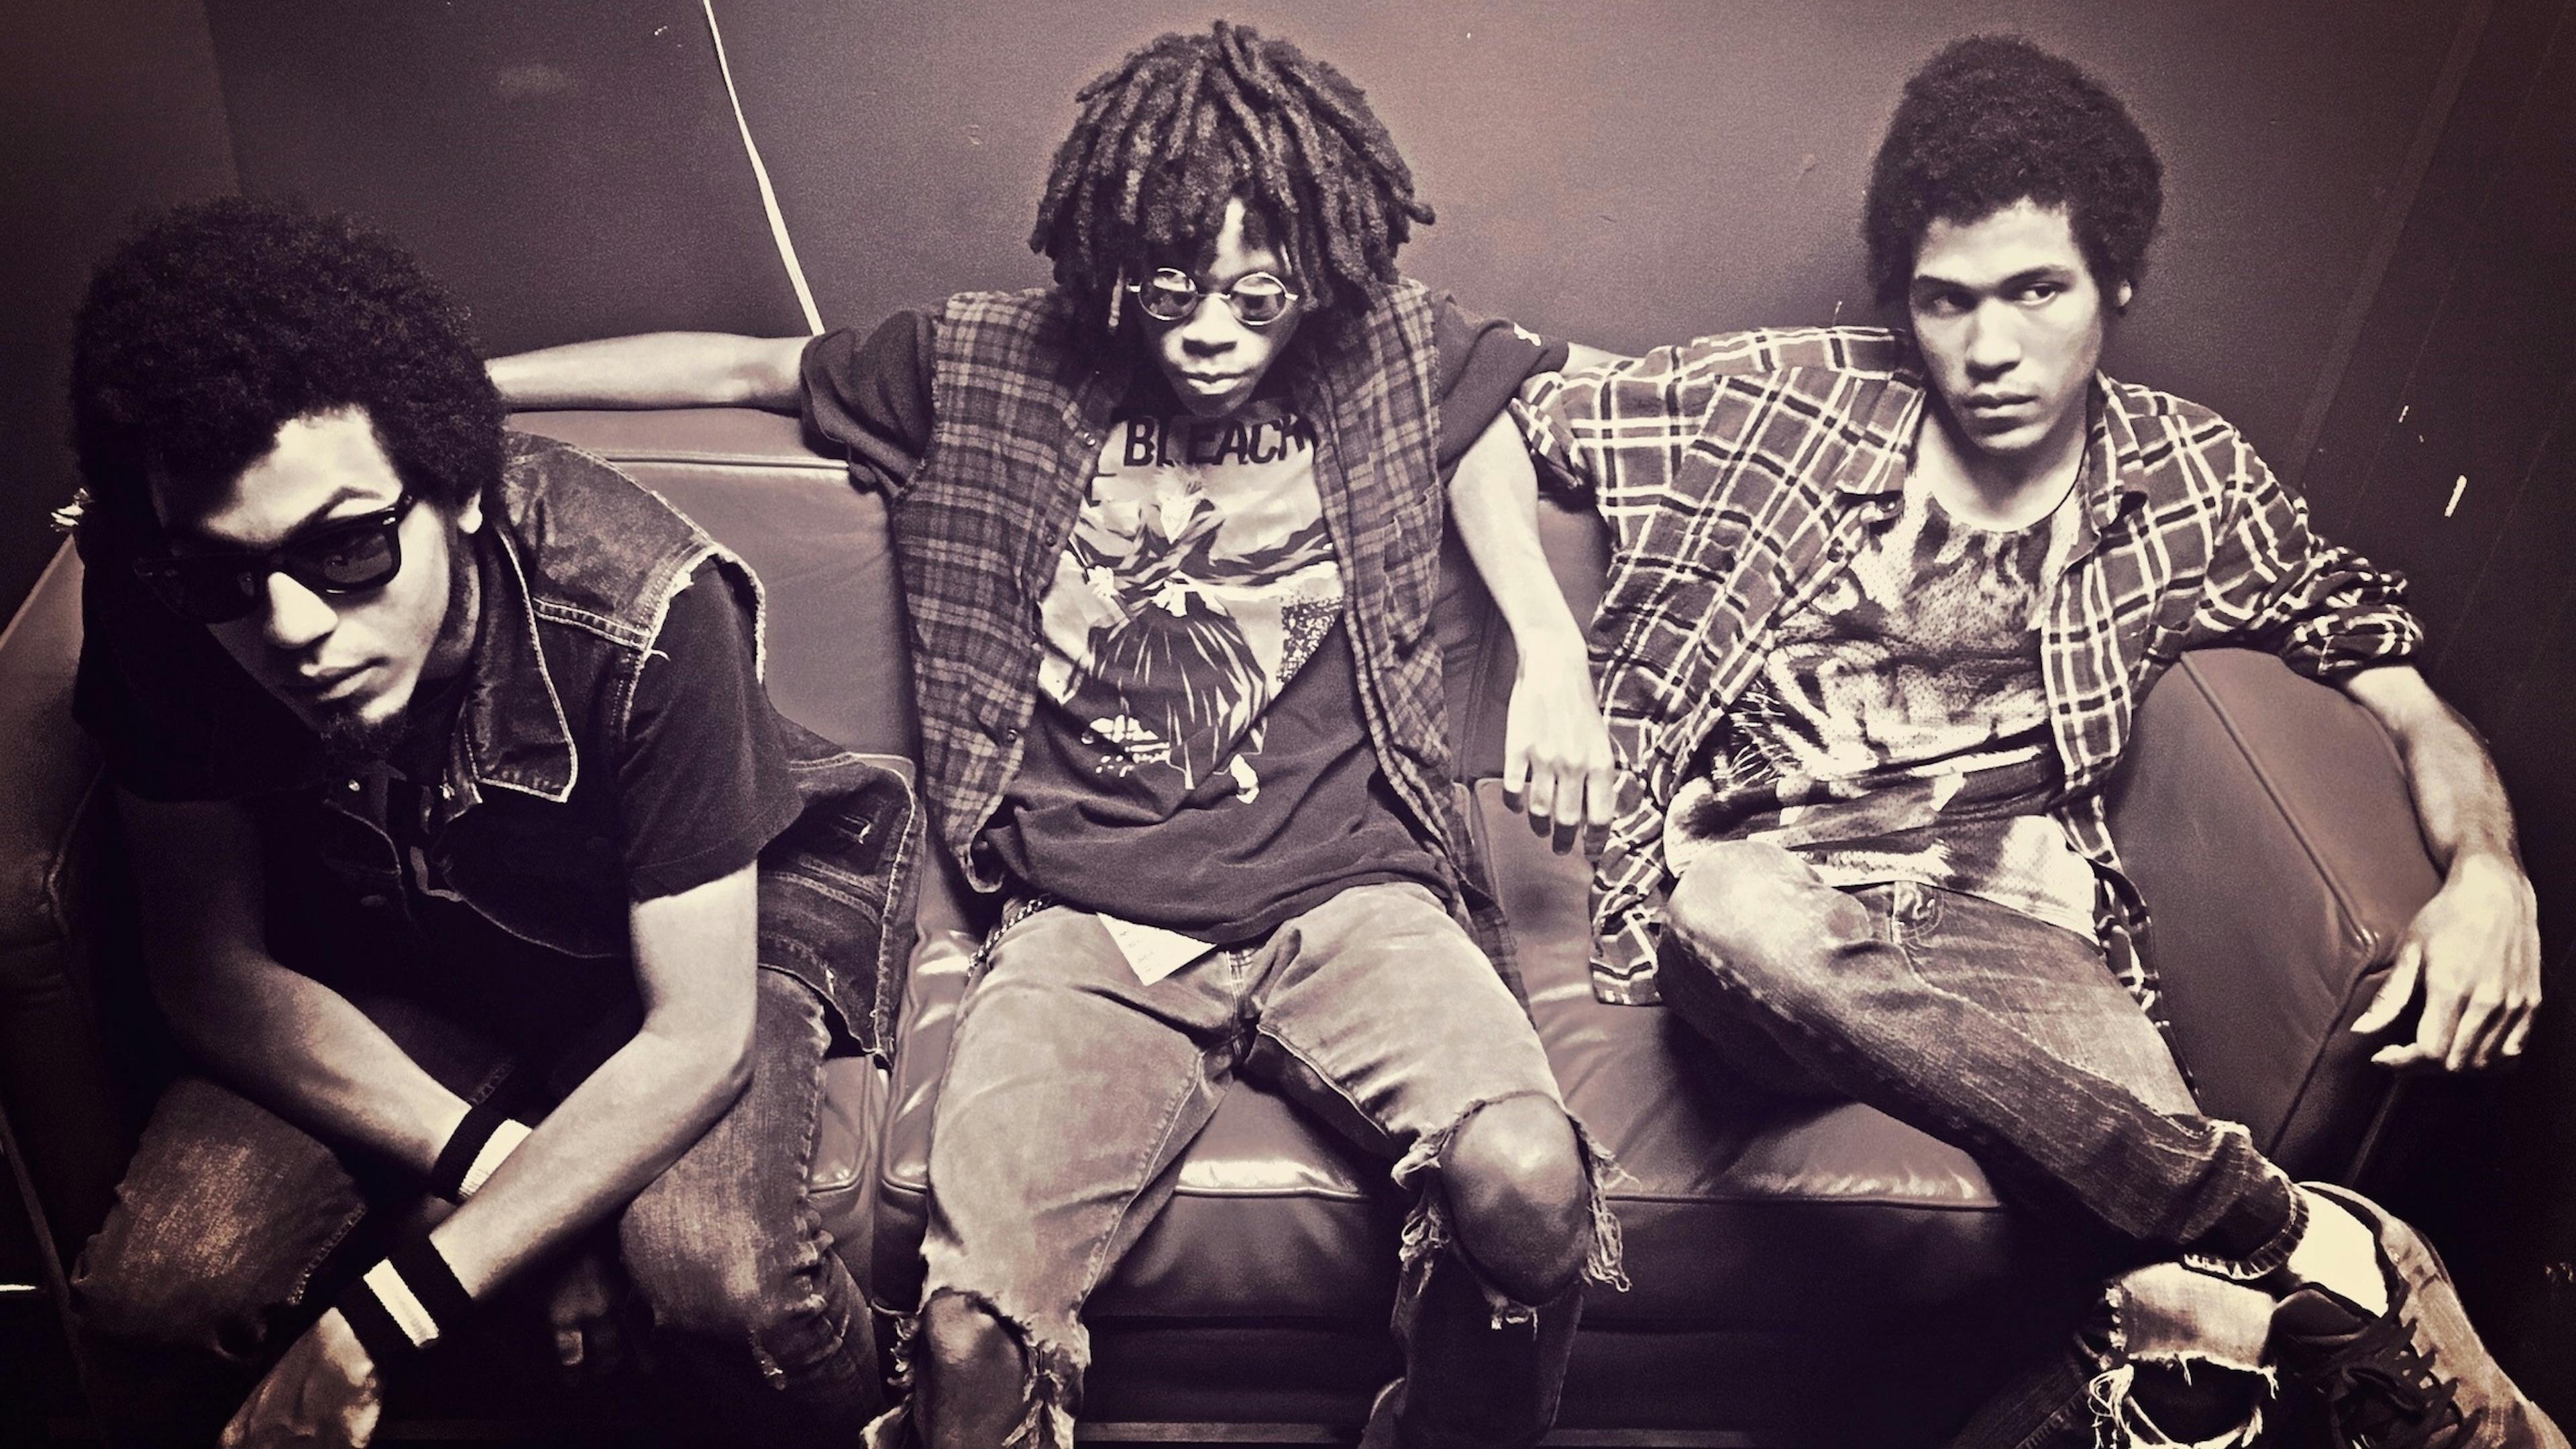 Exclusive: Radkey's New Track Gives Prejudice The Finger